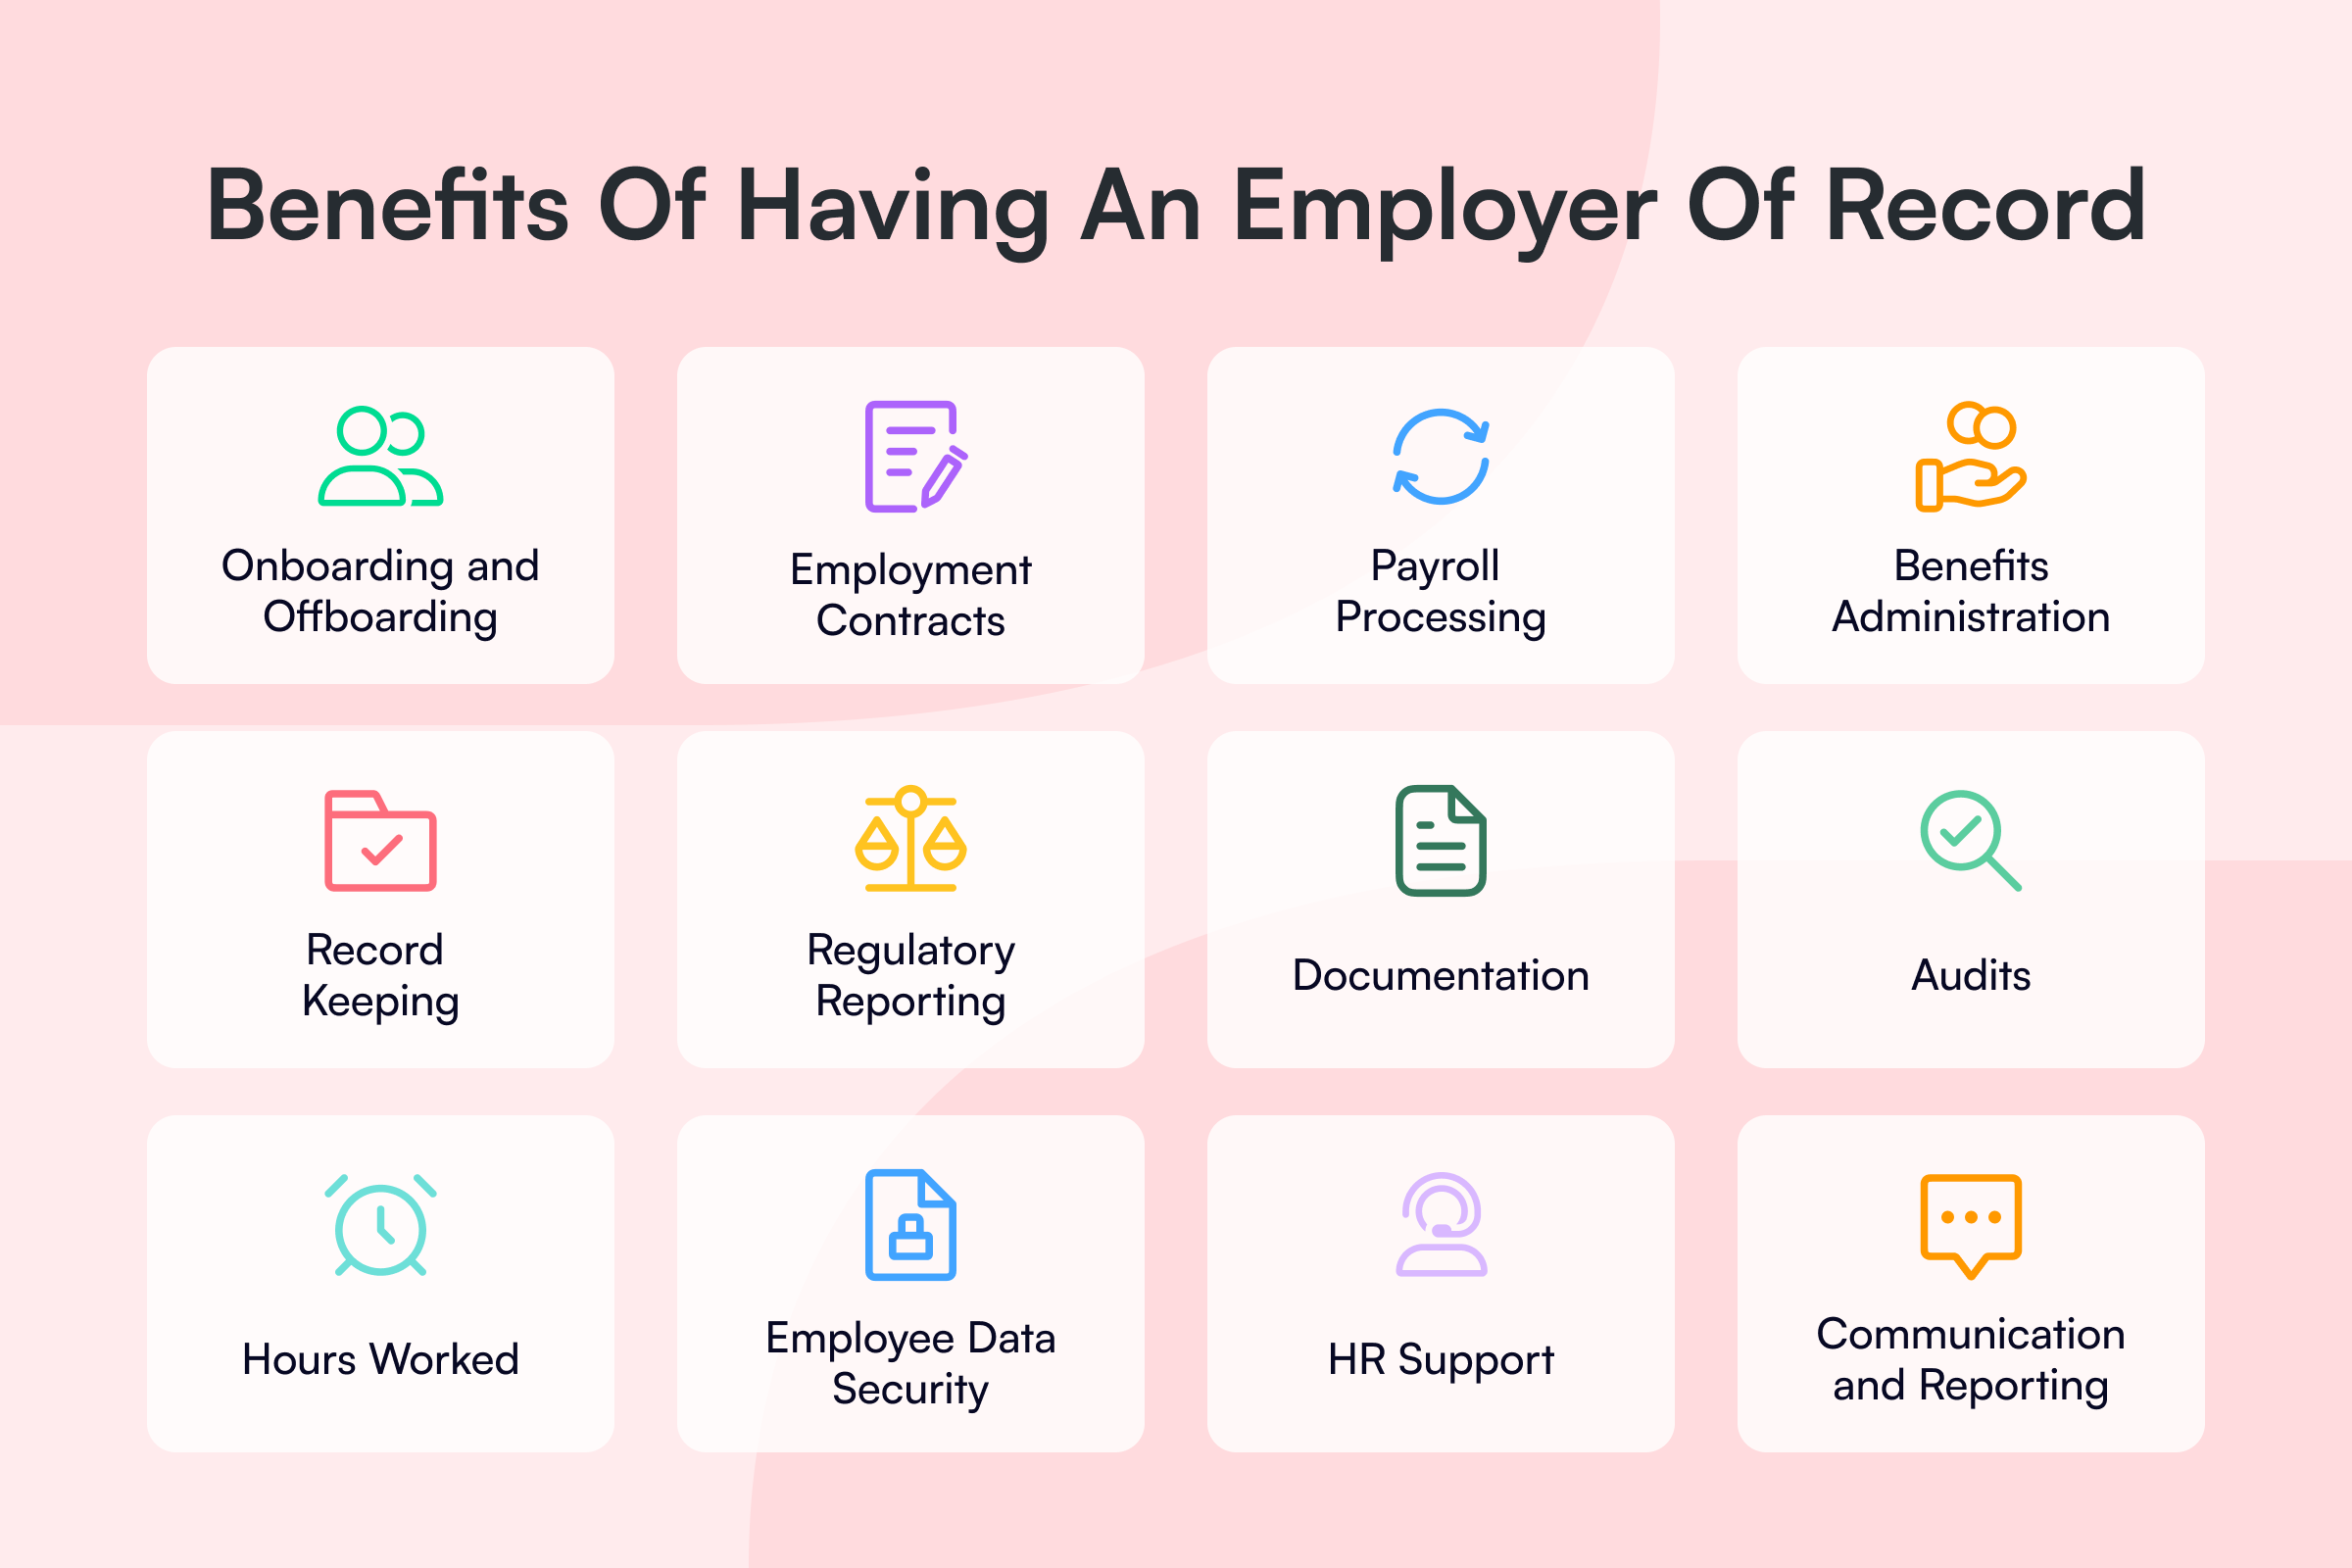 Benefits of having an employer of record